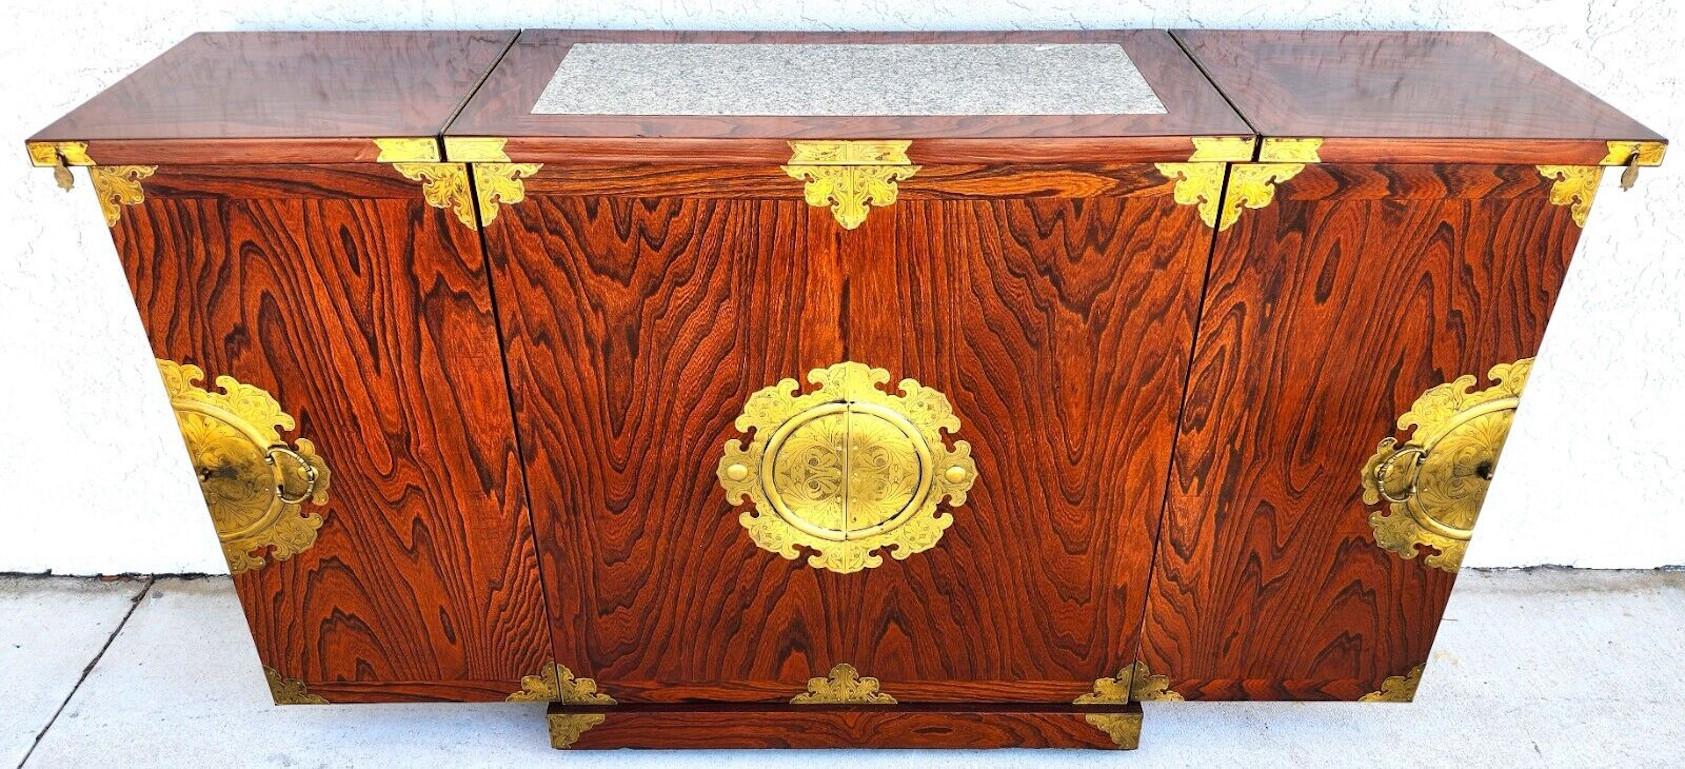 For FULL item description click on CONTINUE READING at the bottom of this page.

Offering One Of Our Recent Palm Beach Estate Fine Furniture Acquisitions Of A
Asian Chinoiserie Fold Out Expandable Rolling Dry Bar in a Rosewood Finish and a Granite